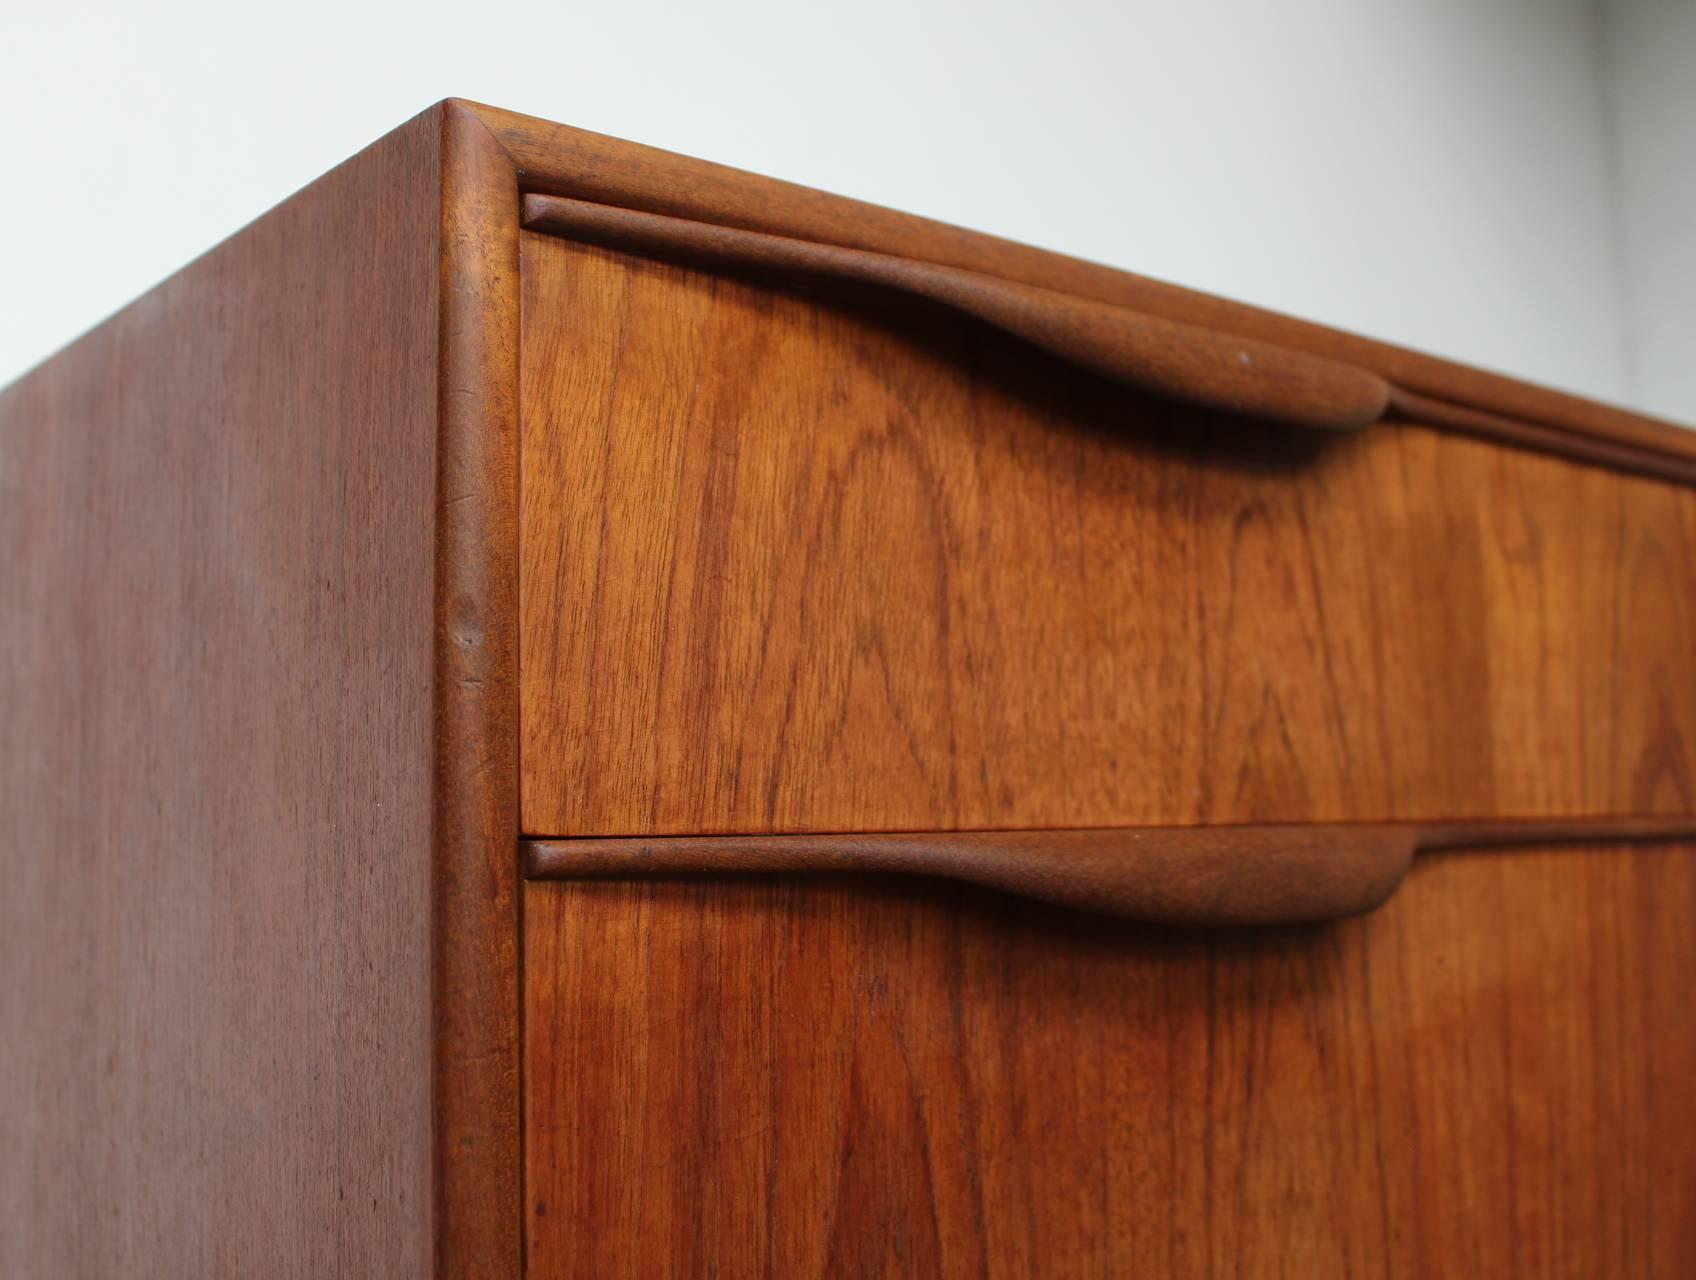 Scottish Sideboard in Teak by A.H. McIntosh & Co 1960s